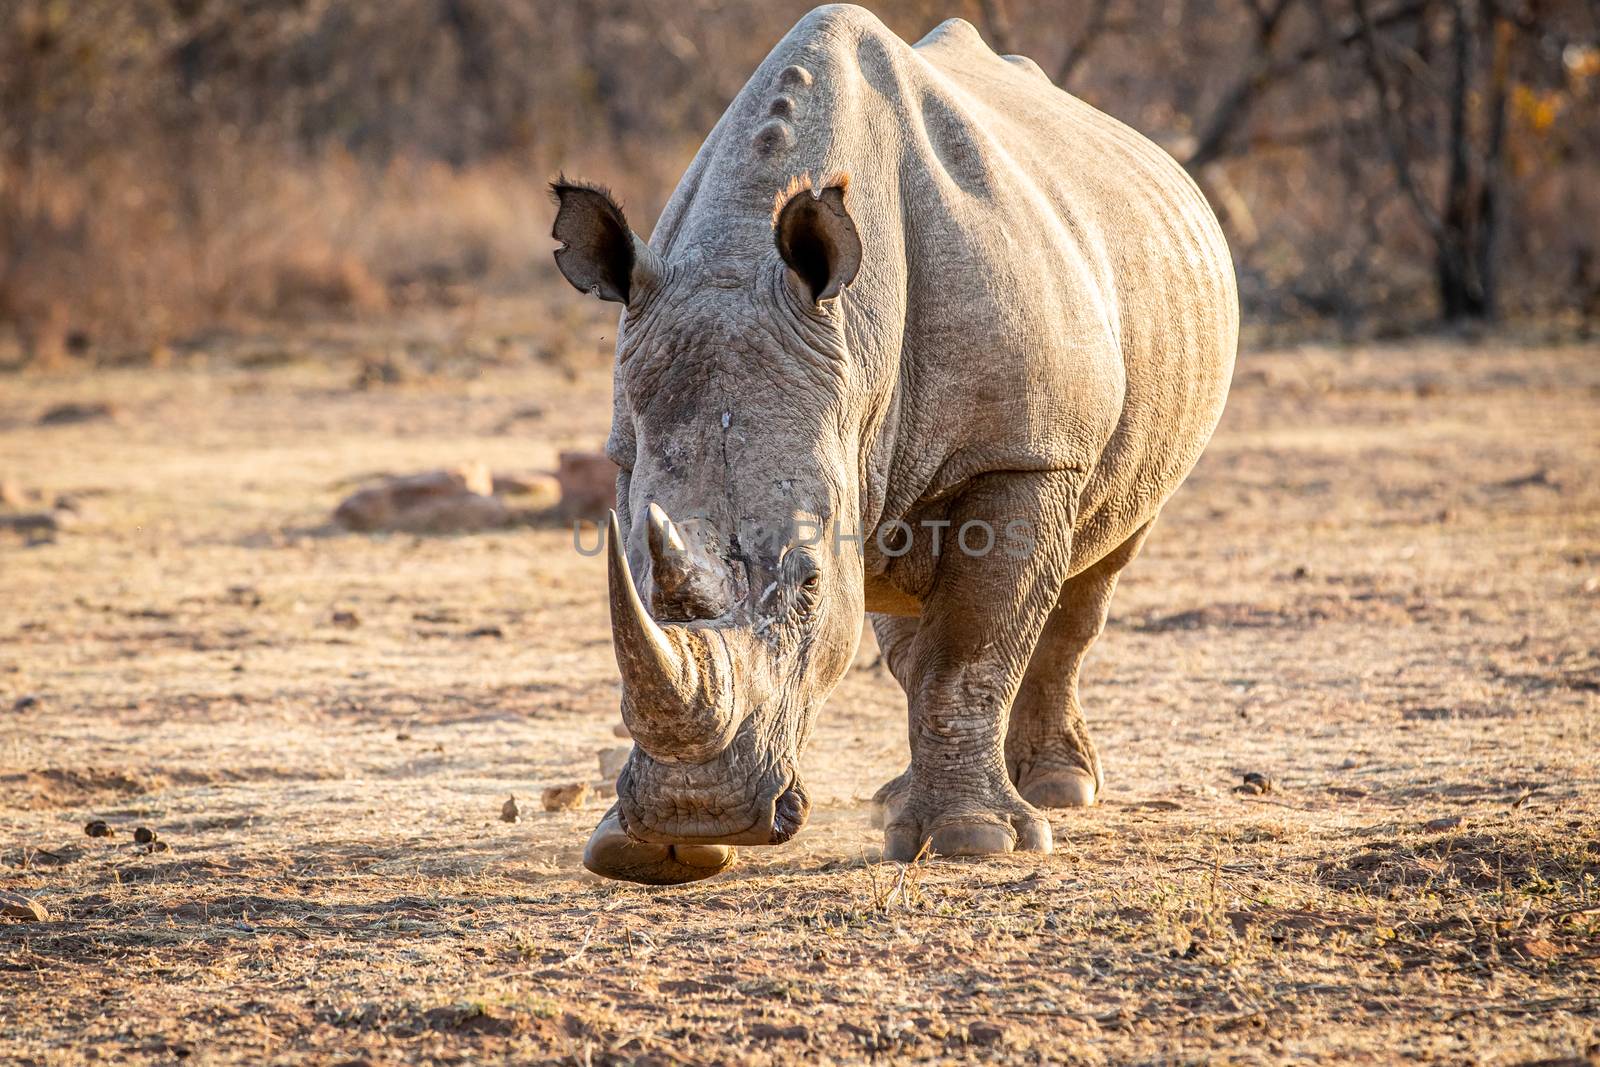 White rhino standing in the grass, South Africa.